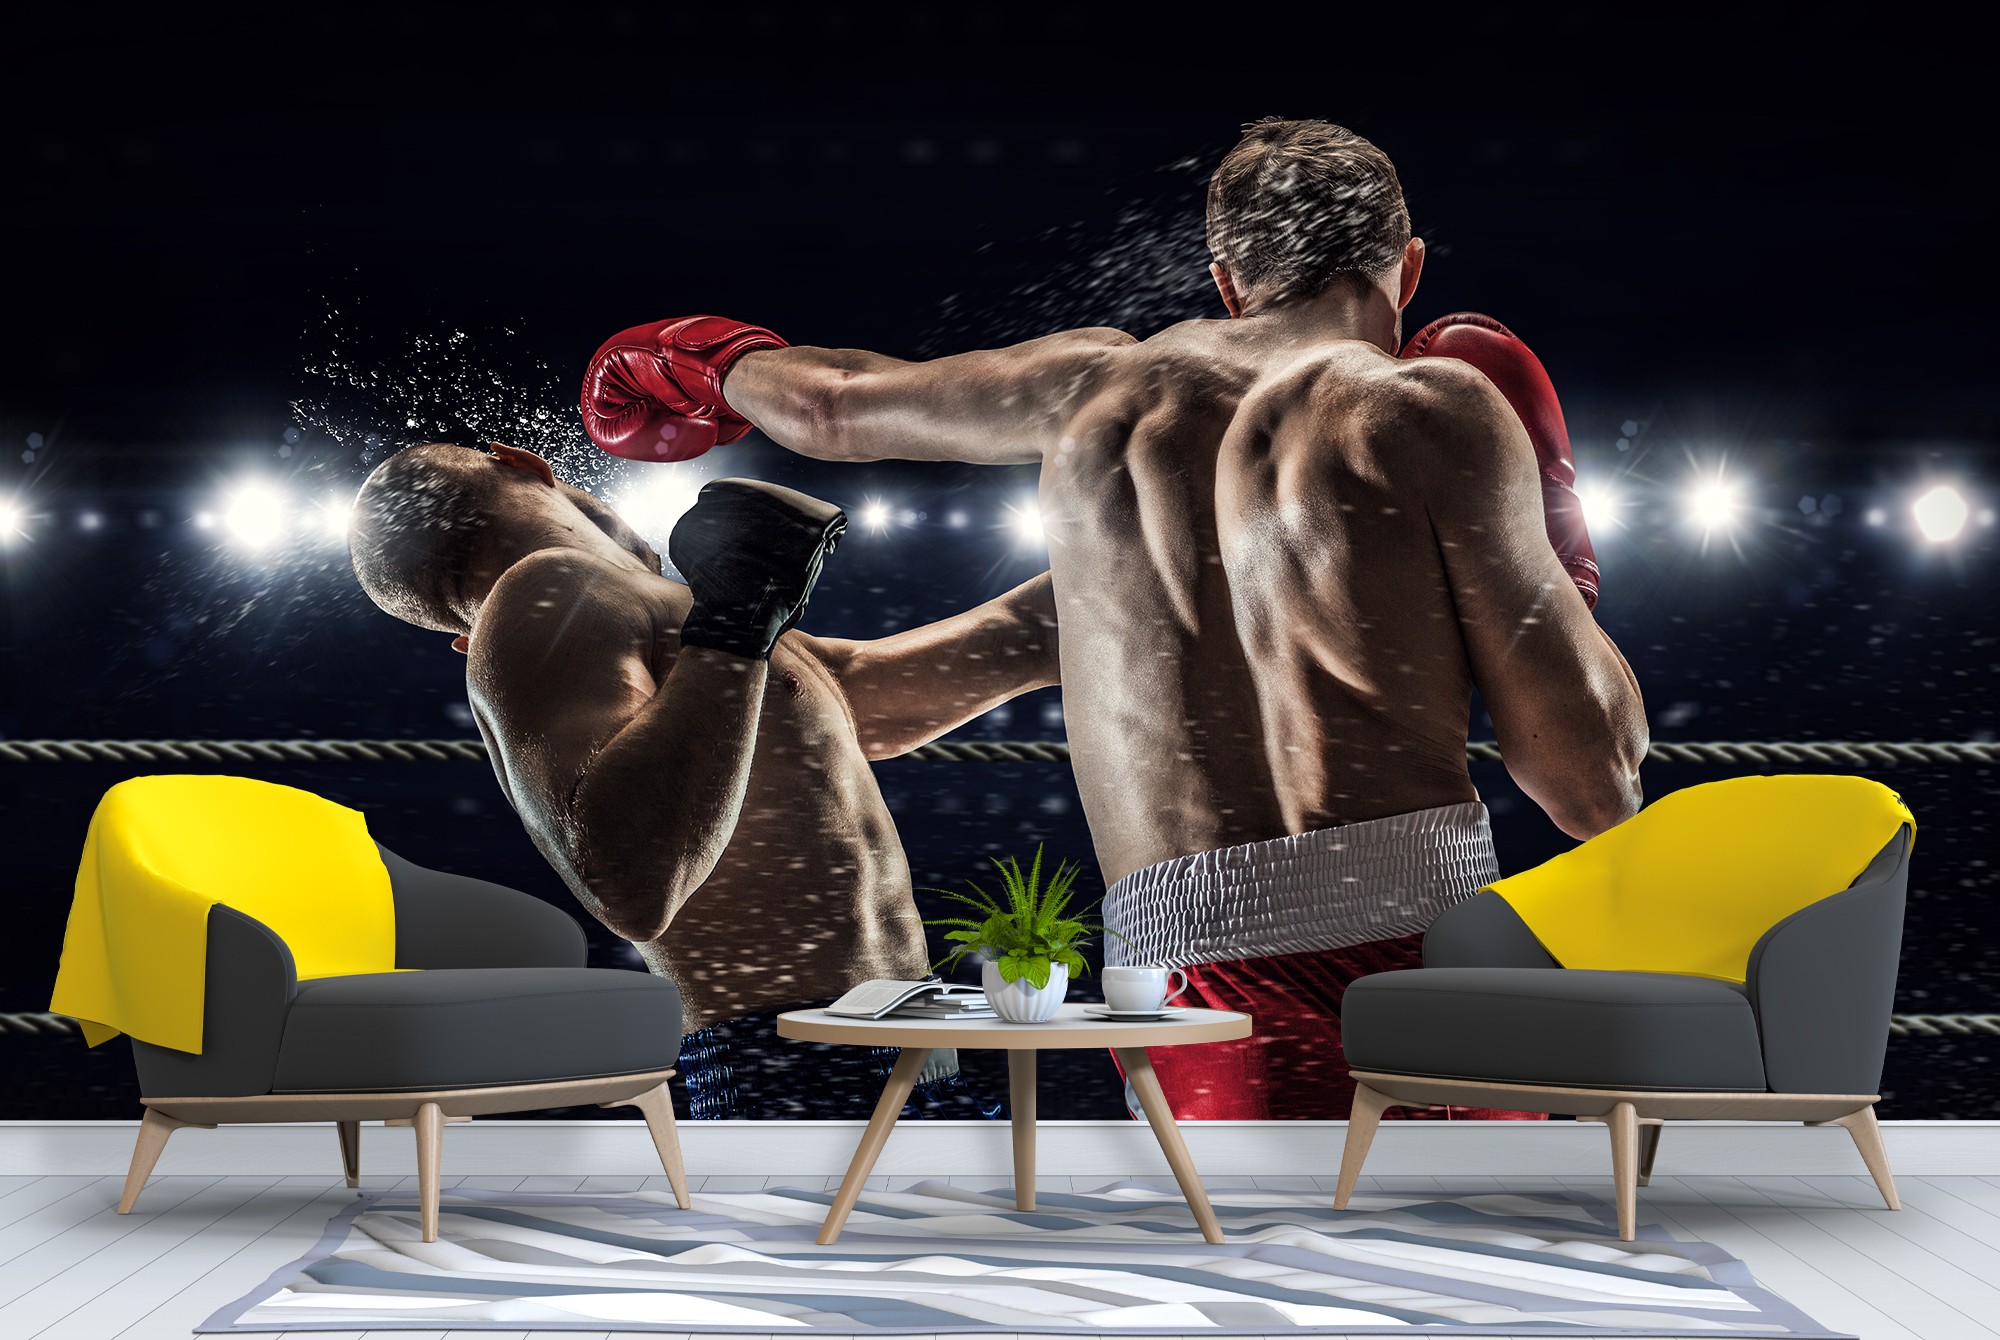 3D Boxing Game N2057 Wallpaper Wall Mural Removable Self-adhesive Sticker  Eve